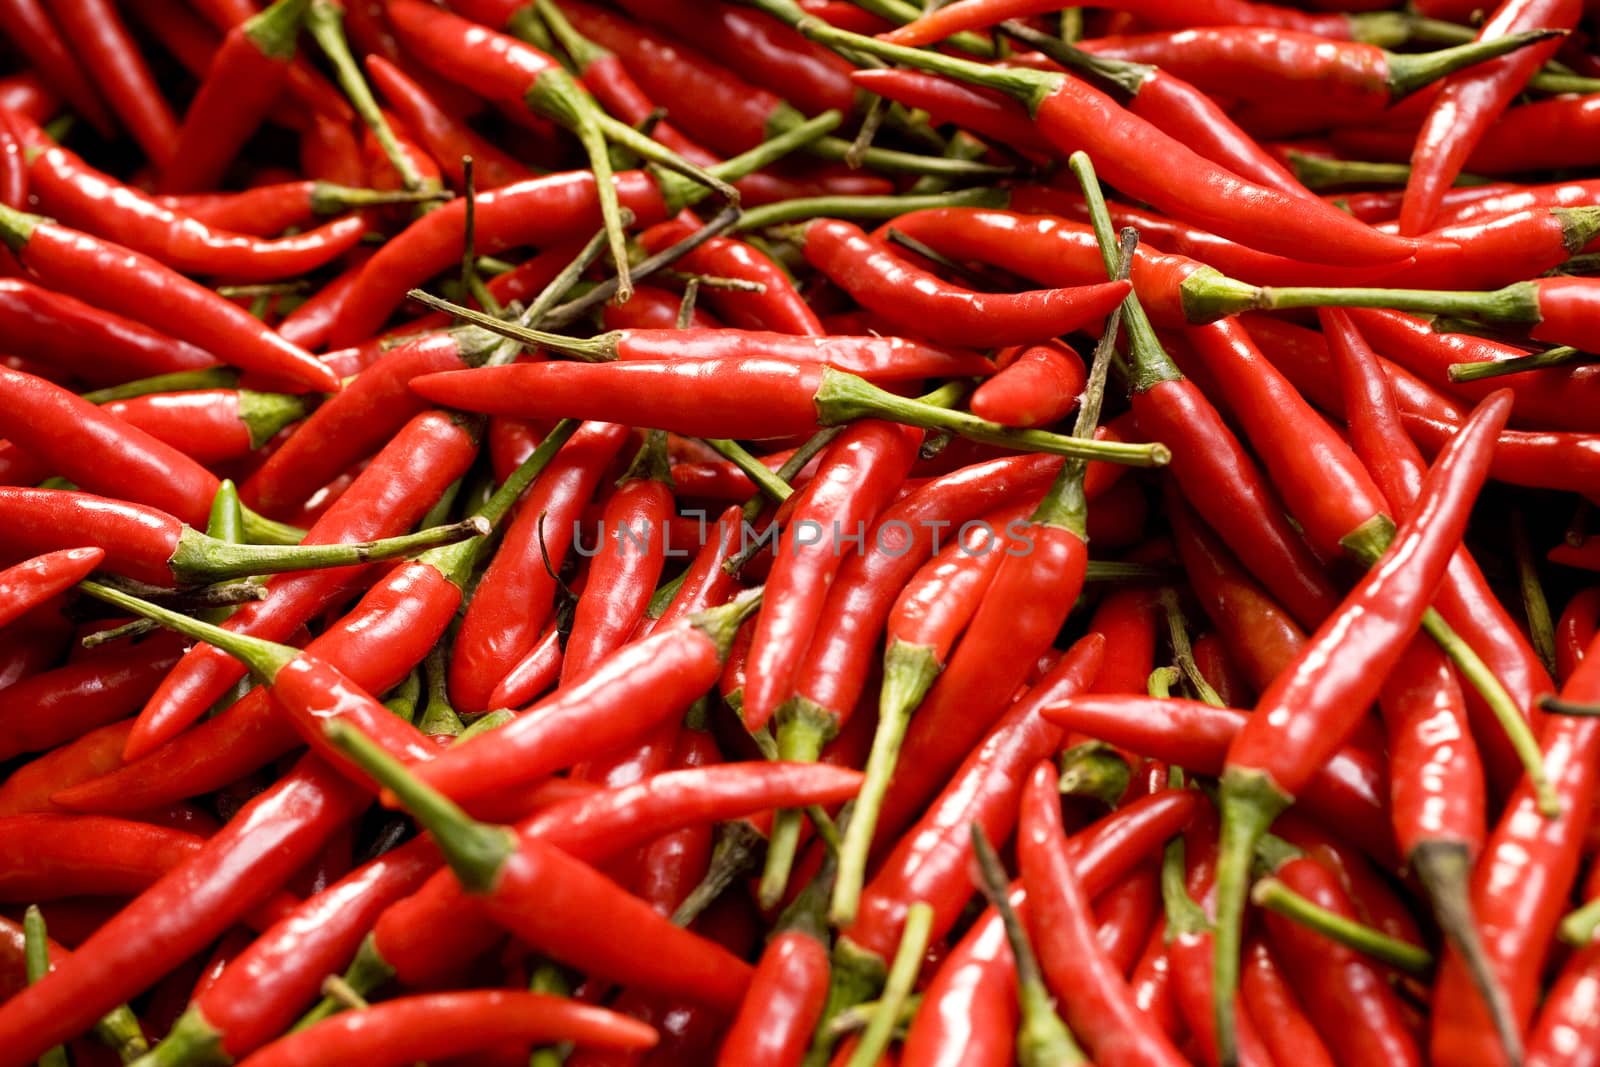  Red Chili Peppers Close-up Background